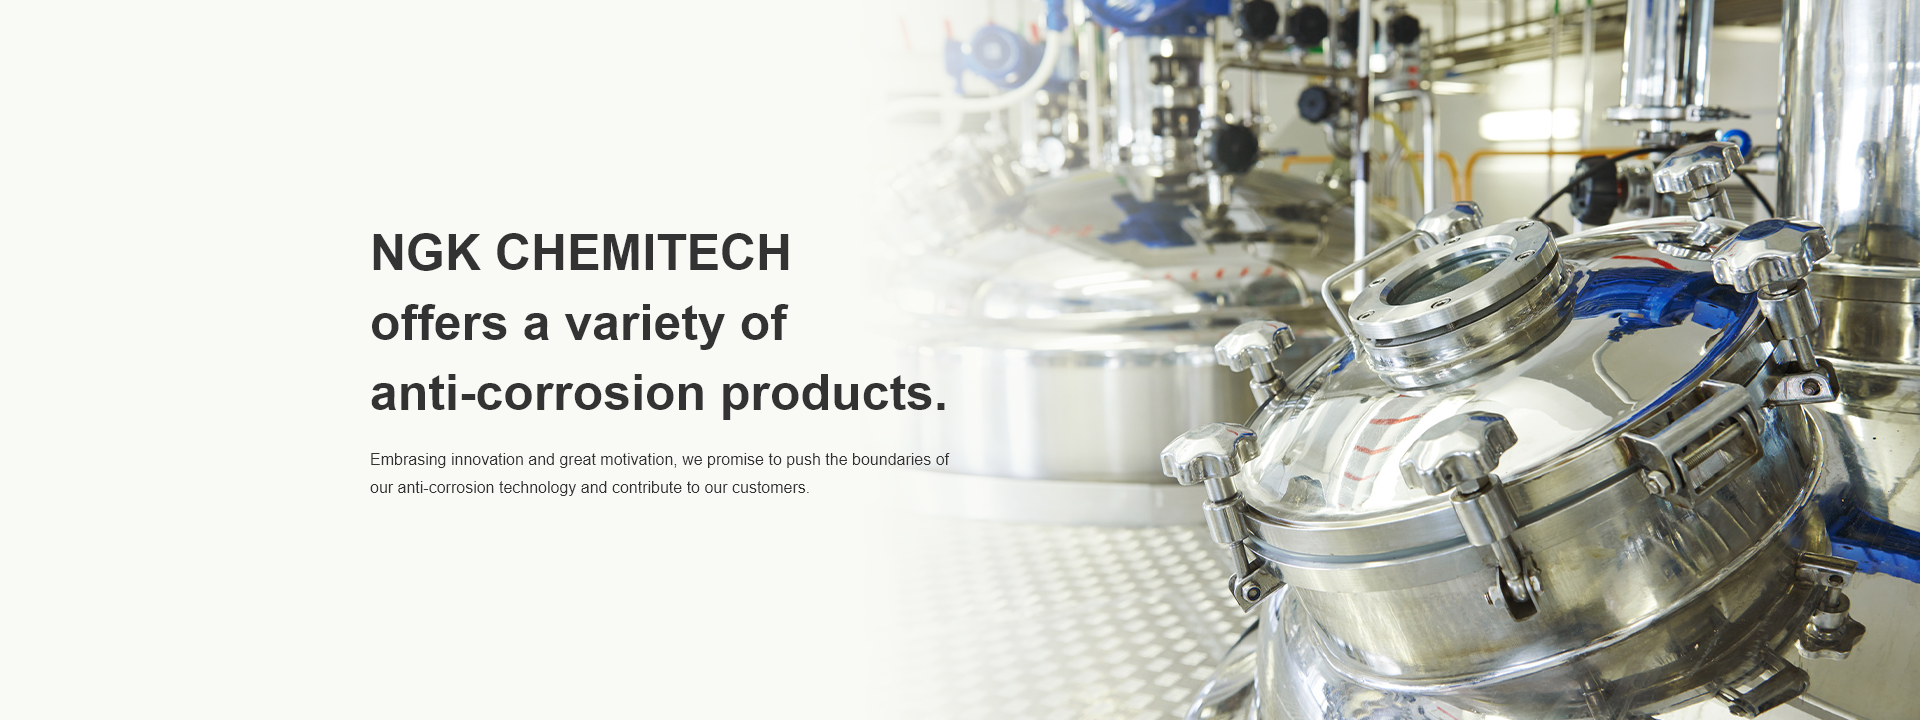 NGK CHEMITECH offers a variety of anti-corrosion products. Embrasing innovation and great motivation, we promise to push the boundaries of our anti-corrosion technology and contribute to our customers.